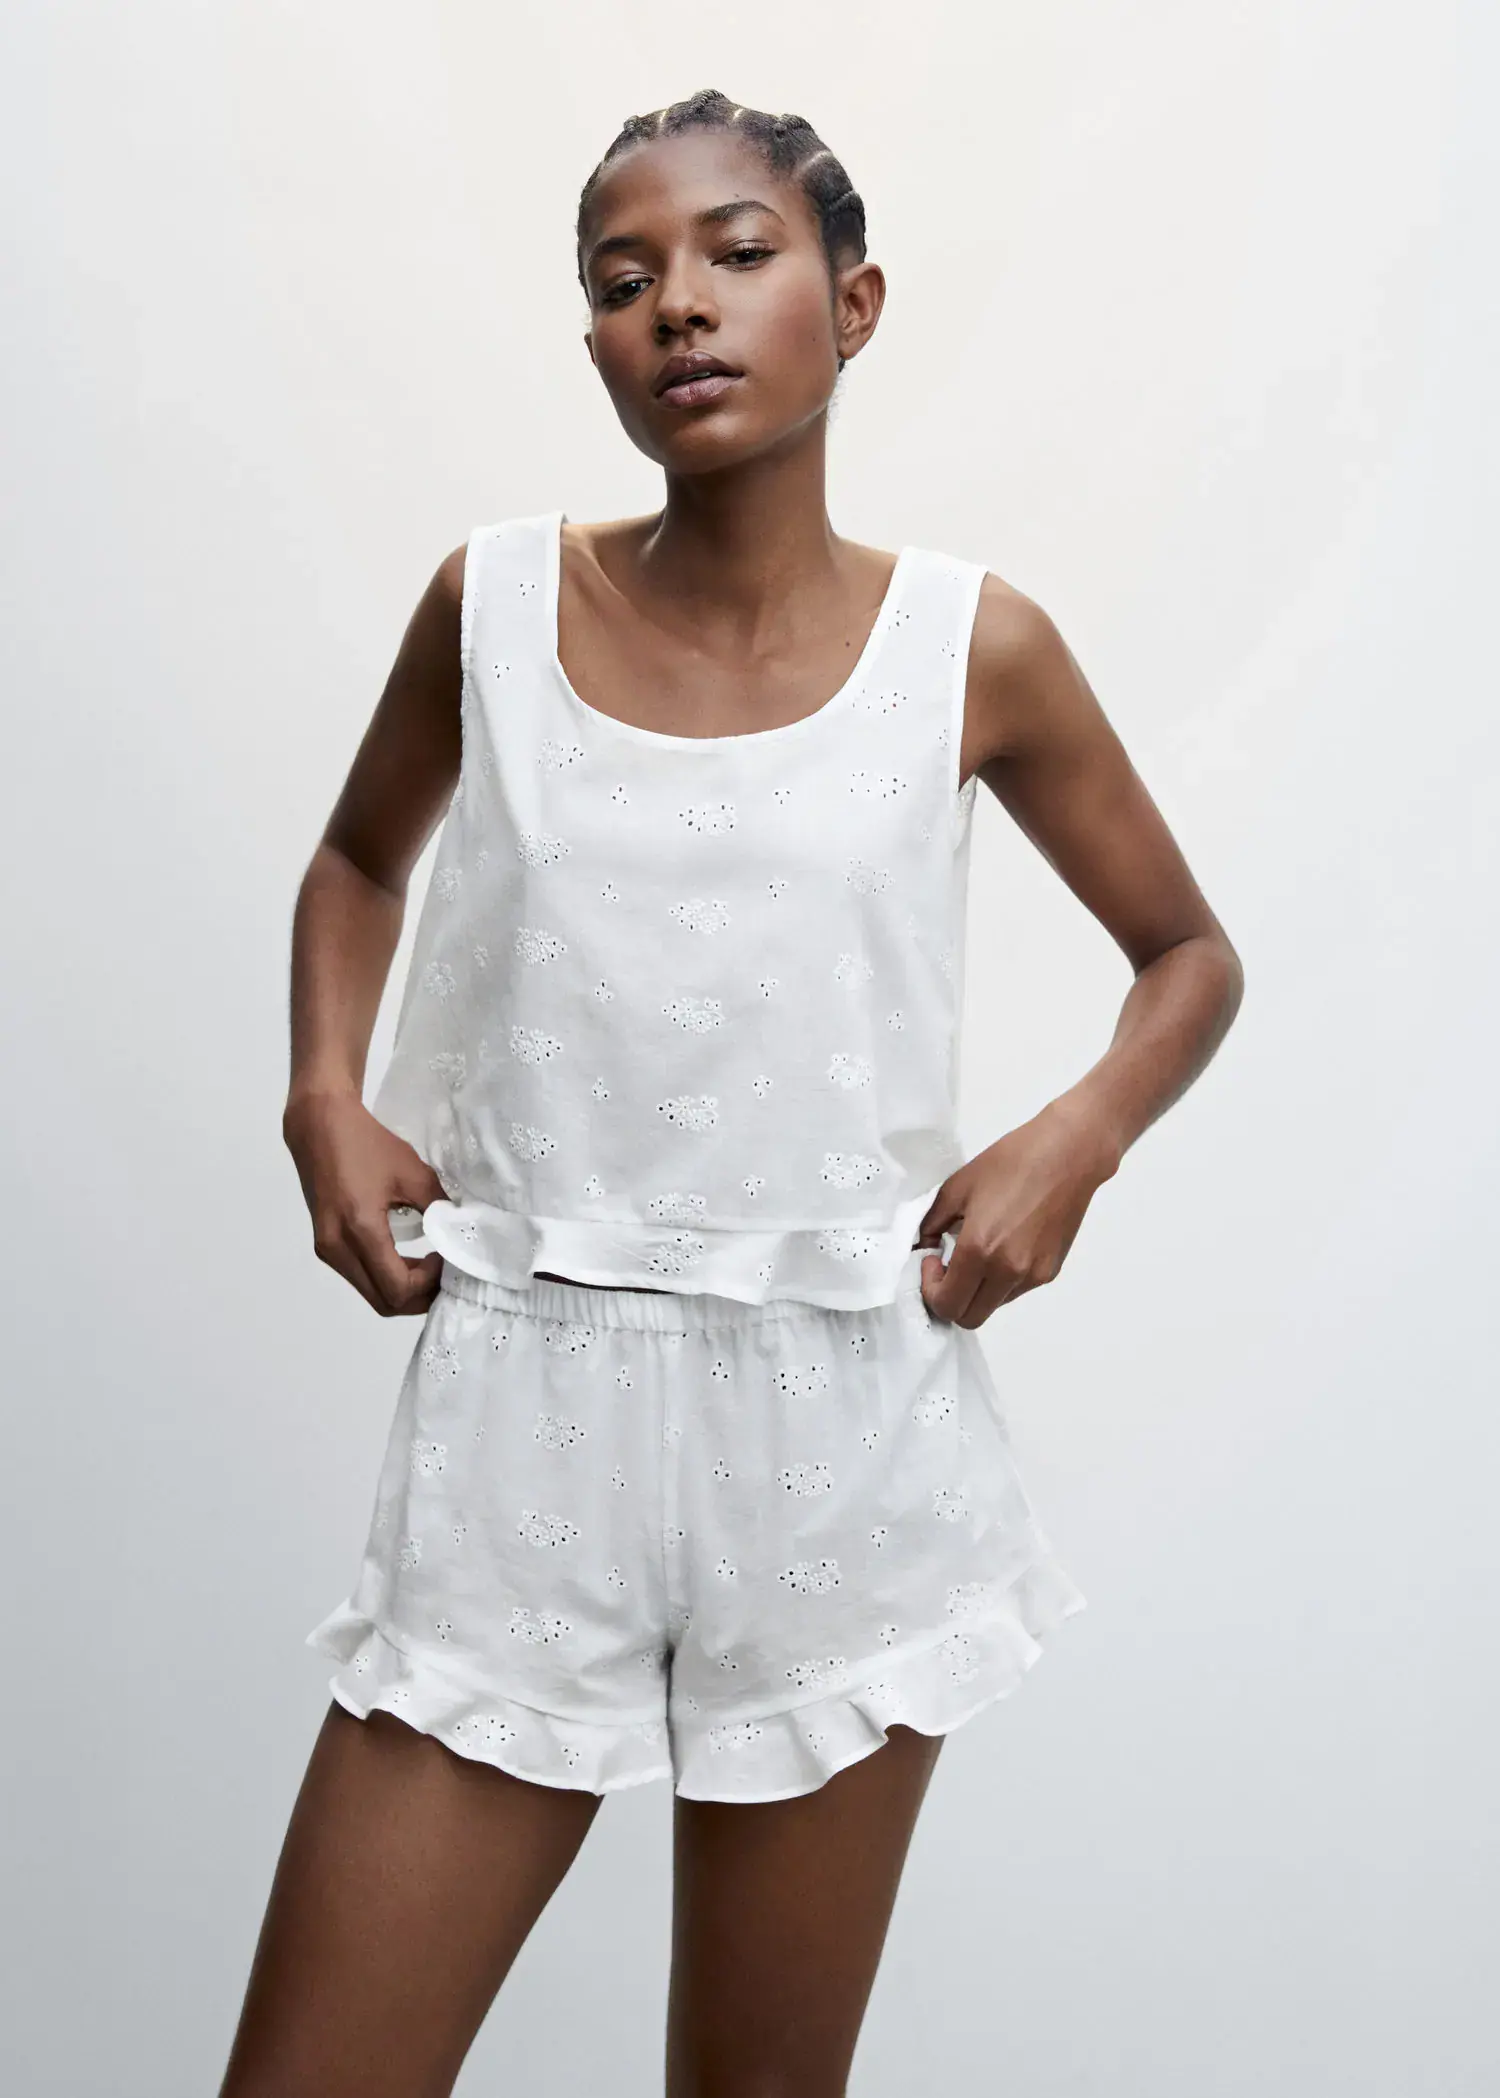 Mango Pyjama top with openwork details. a woman in a white outfit posing for a picture. 